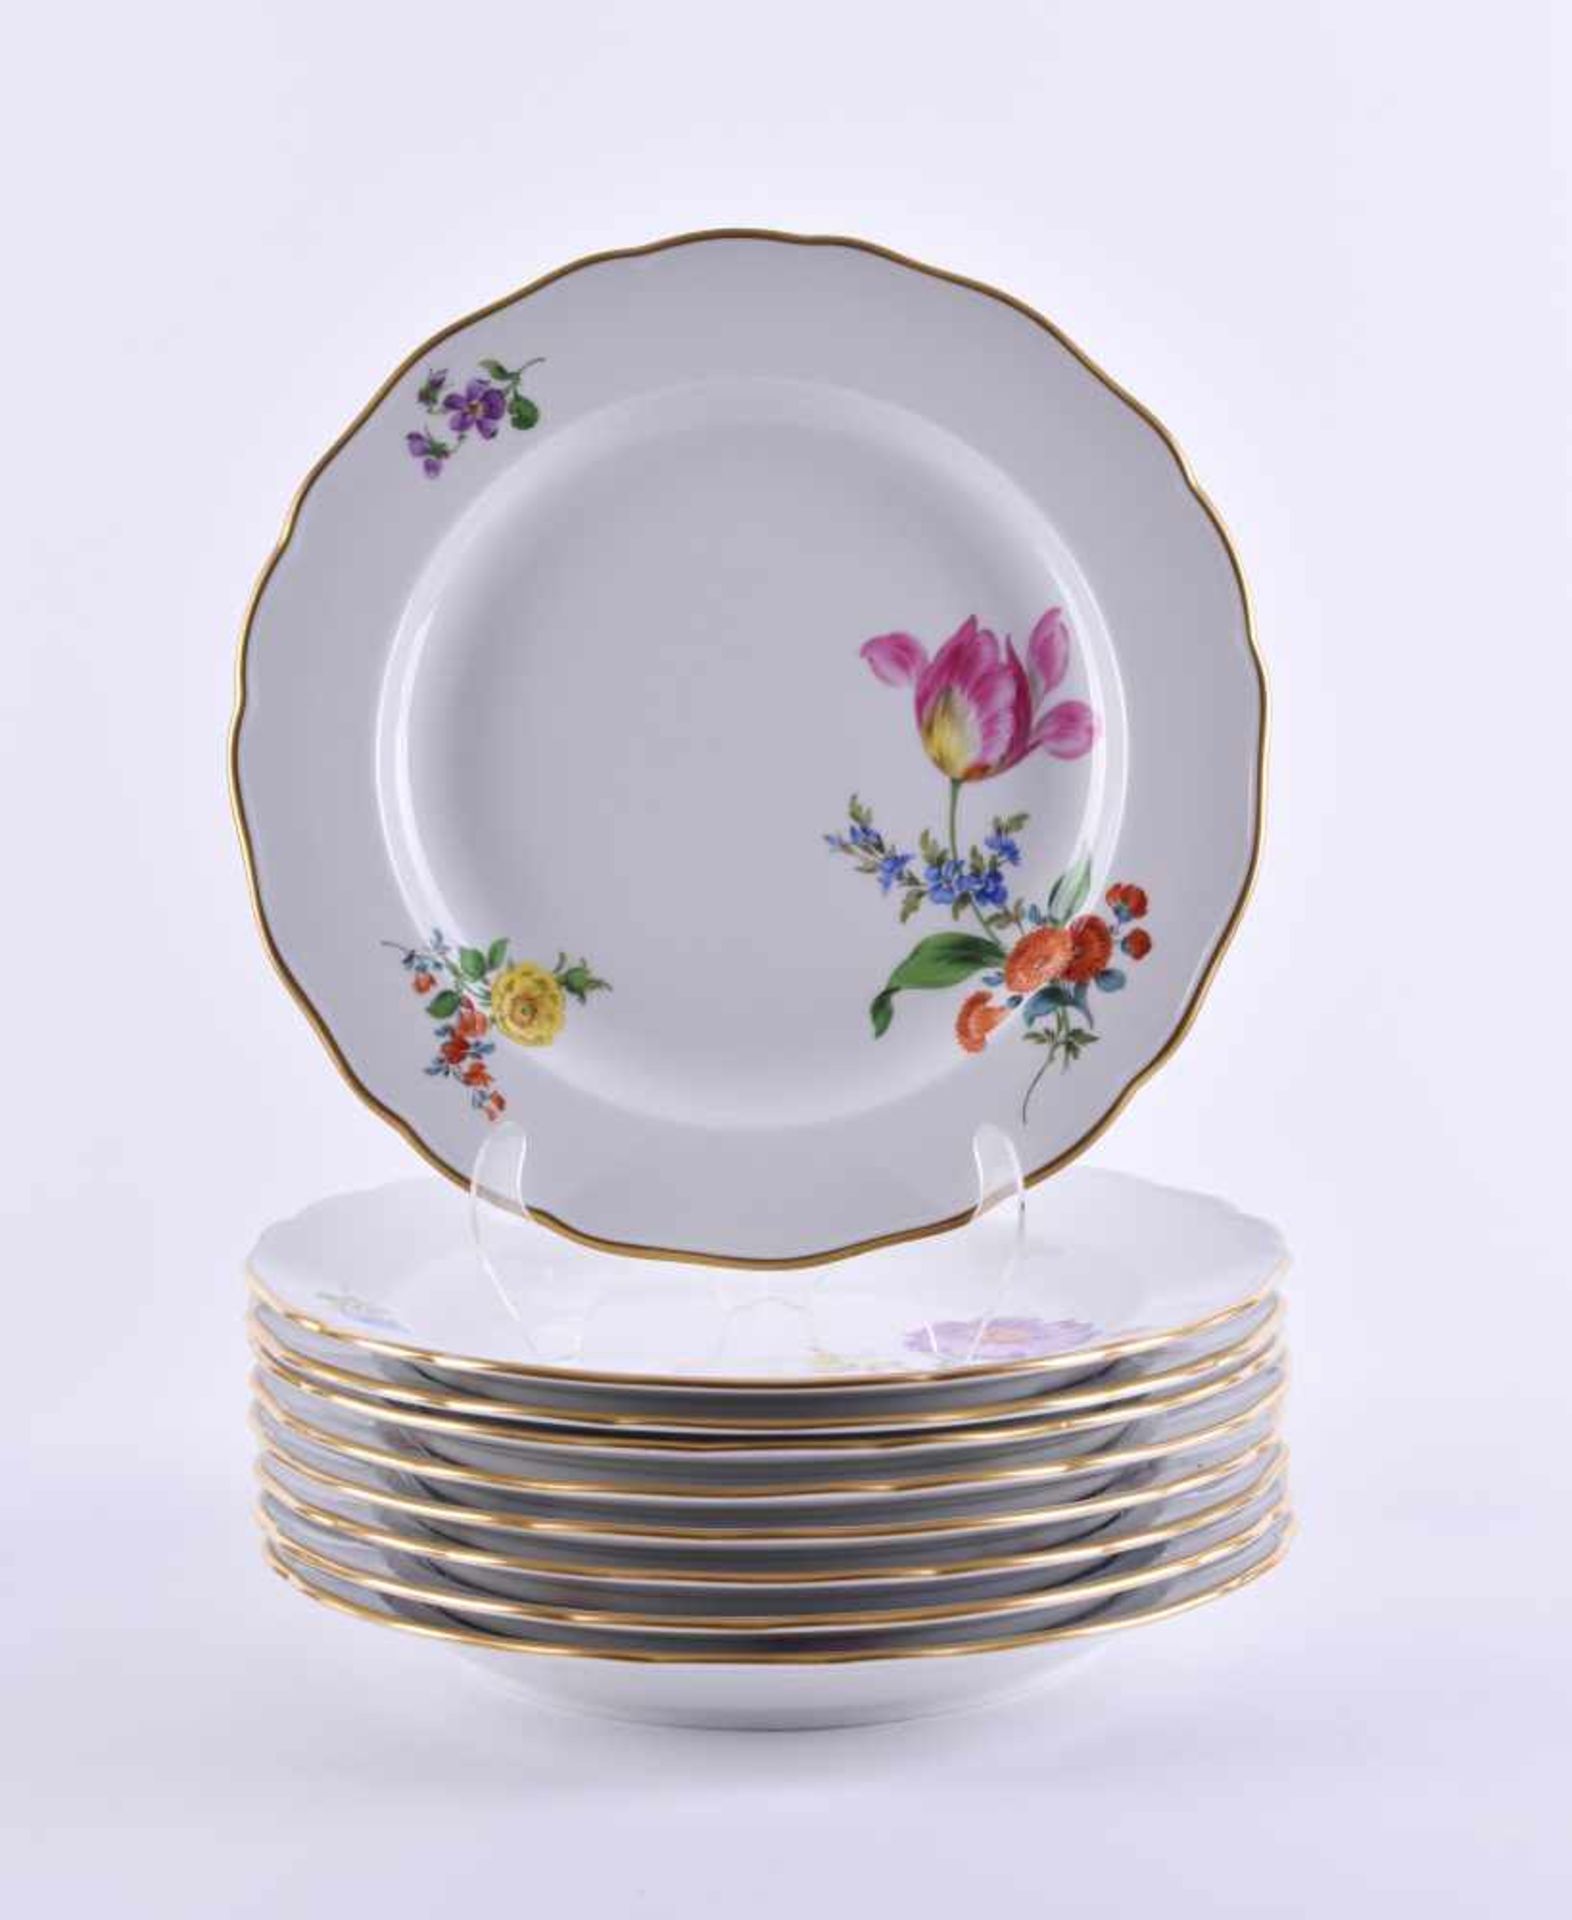 9 dinner plates Meissencolored and gold painted, decor with German flower bouquet, blue sword